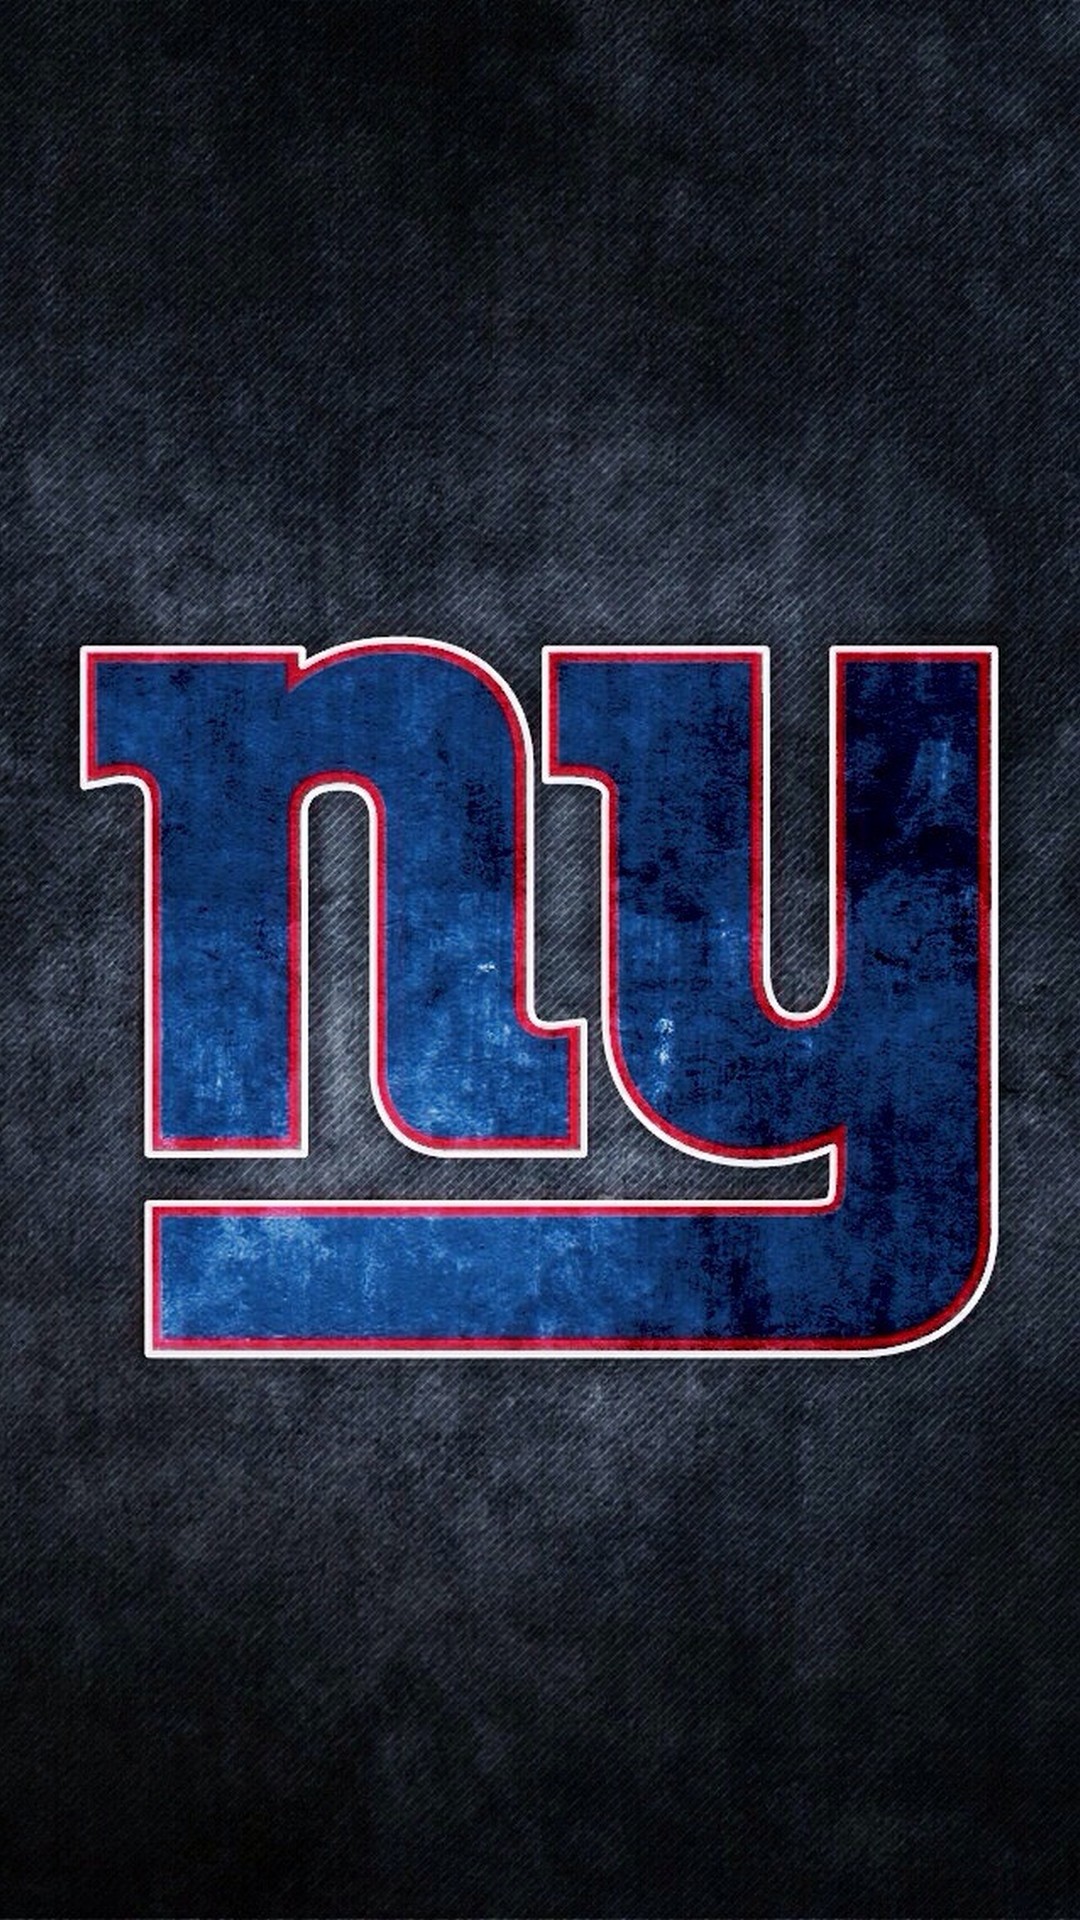 New York Giants iPhone Wallpaper Home Screen with high-resolution 1080x1920 pixel. Download and set as wallpaper for Desktop Computer, Apple iPhone X, XS Max, XR, 8, 7, 6, SE, iPad, Android